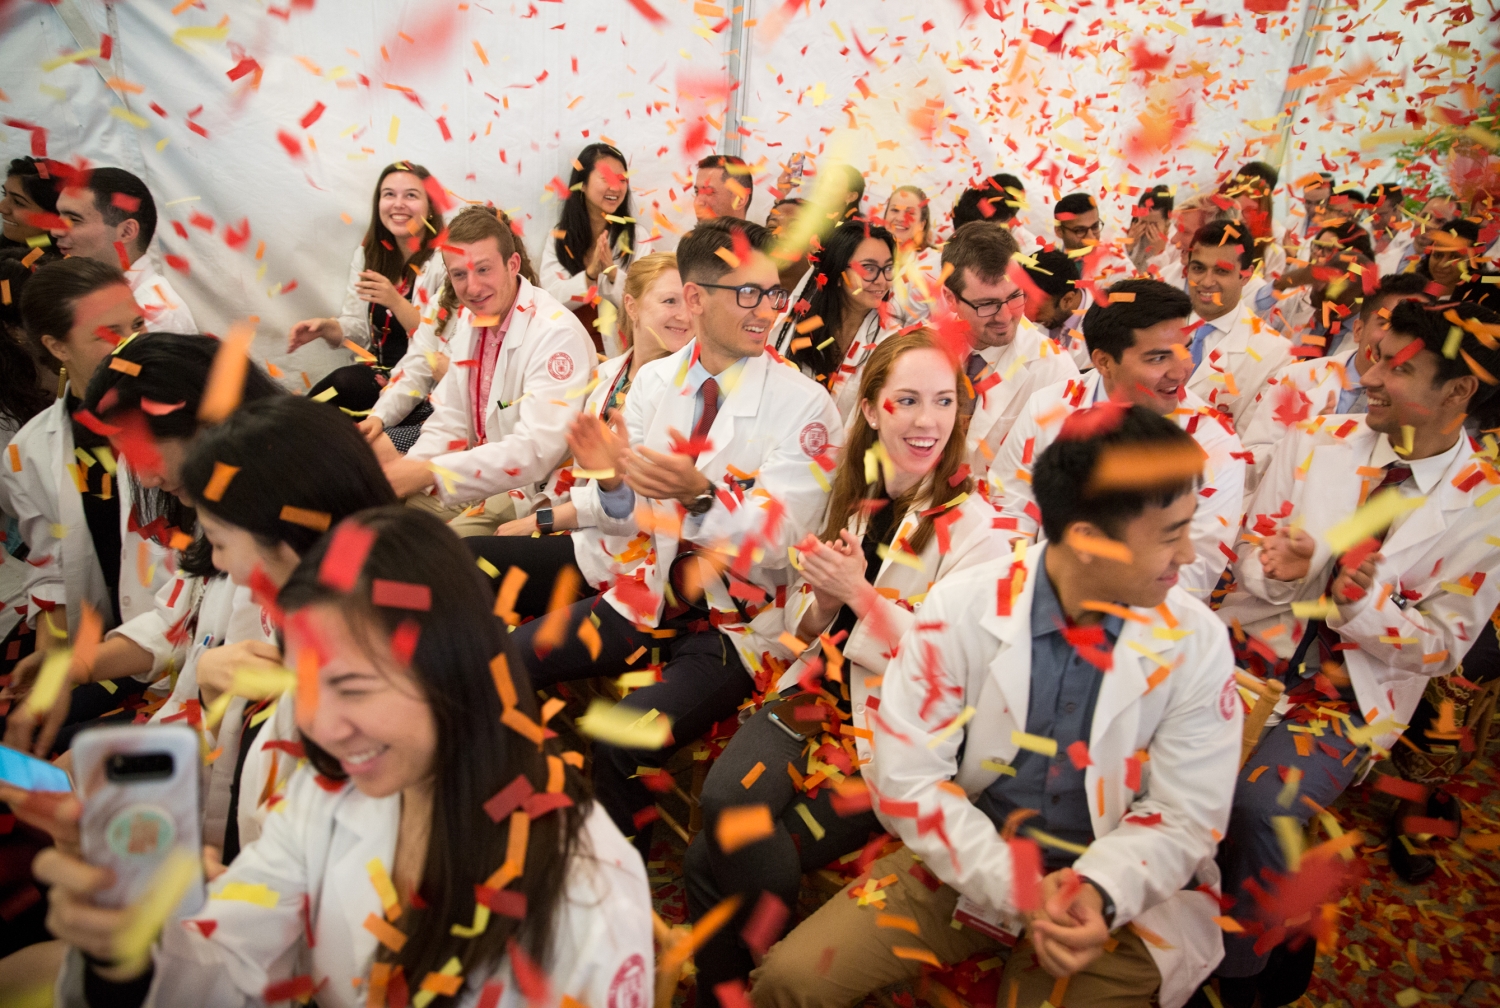 Students celebrating at an event